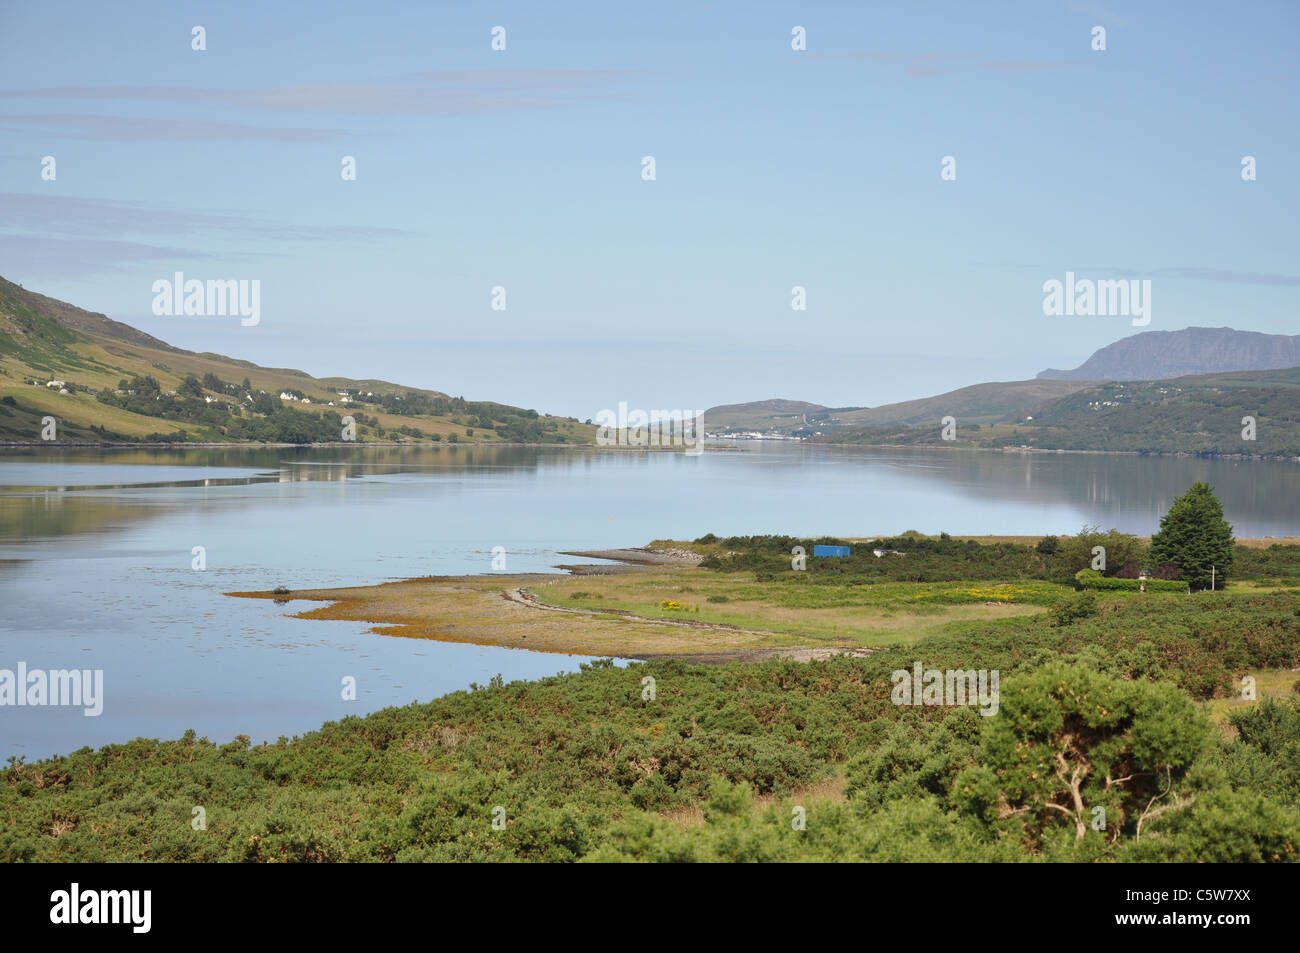 Ullapool, Wester Ross, Loch Broom, Ecosse, Royaume-Uni Banque D'Images